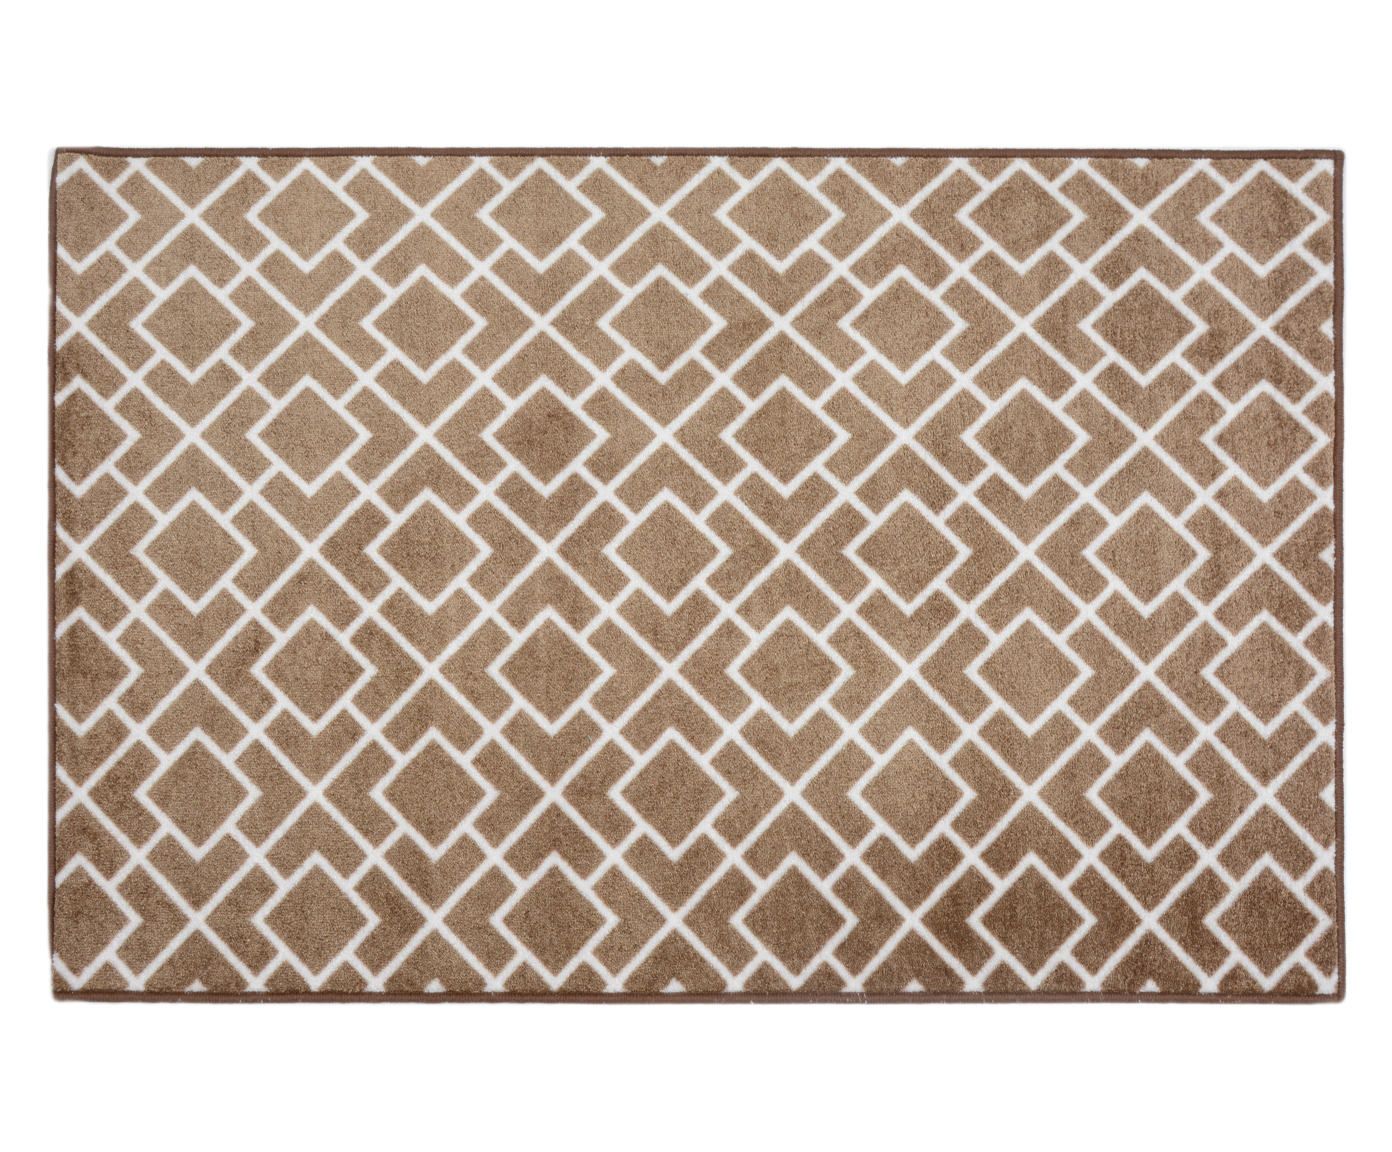 Tapete Italy Lattice - 150X200cm | Westwing.com.br